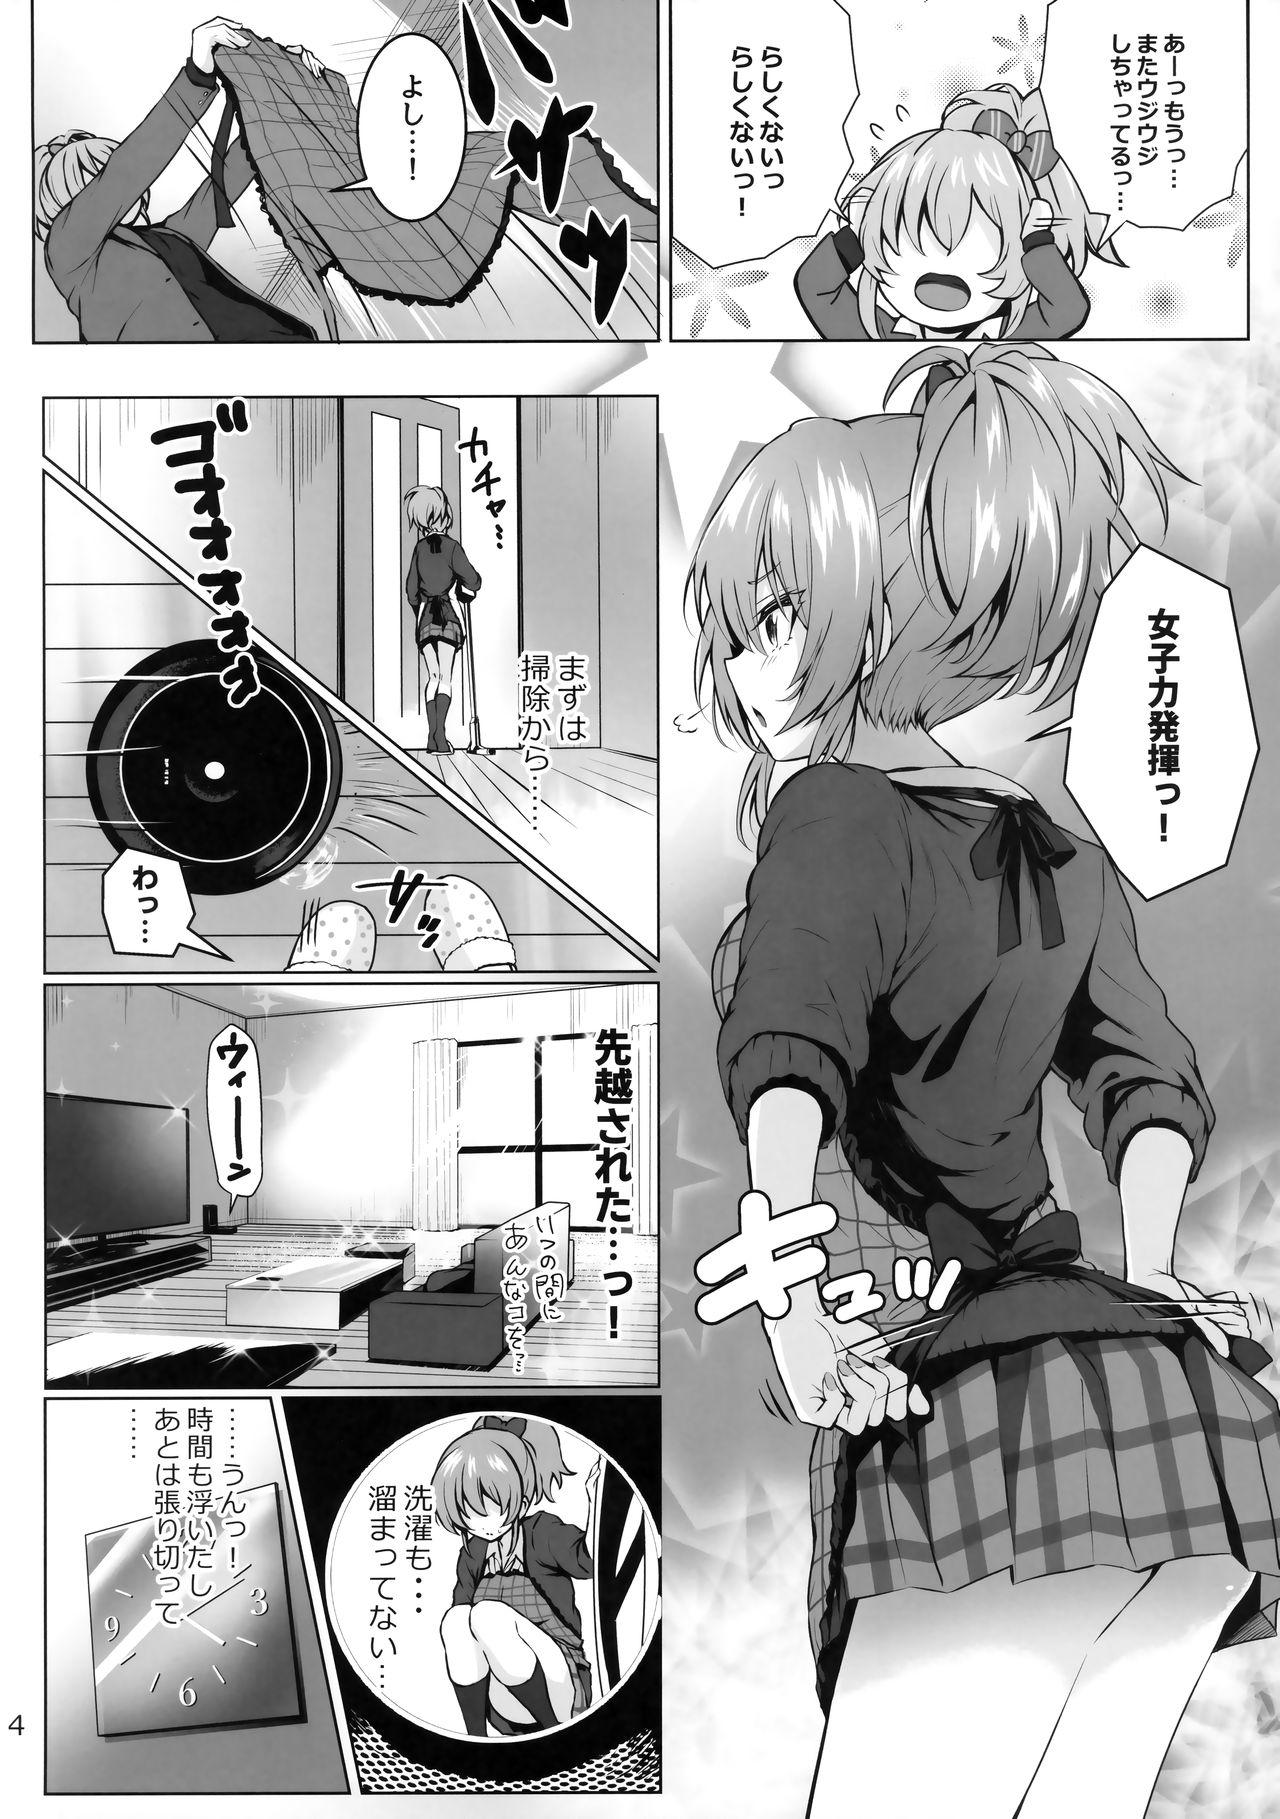 Gordinha Mika and P++ - The idolmaster Family Roleplay - Page 3